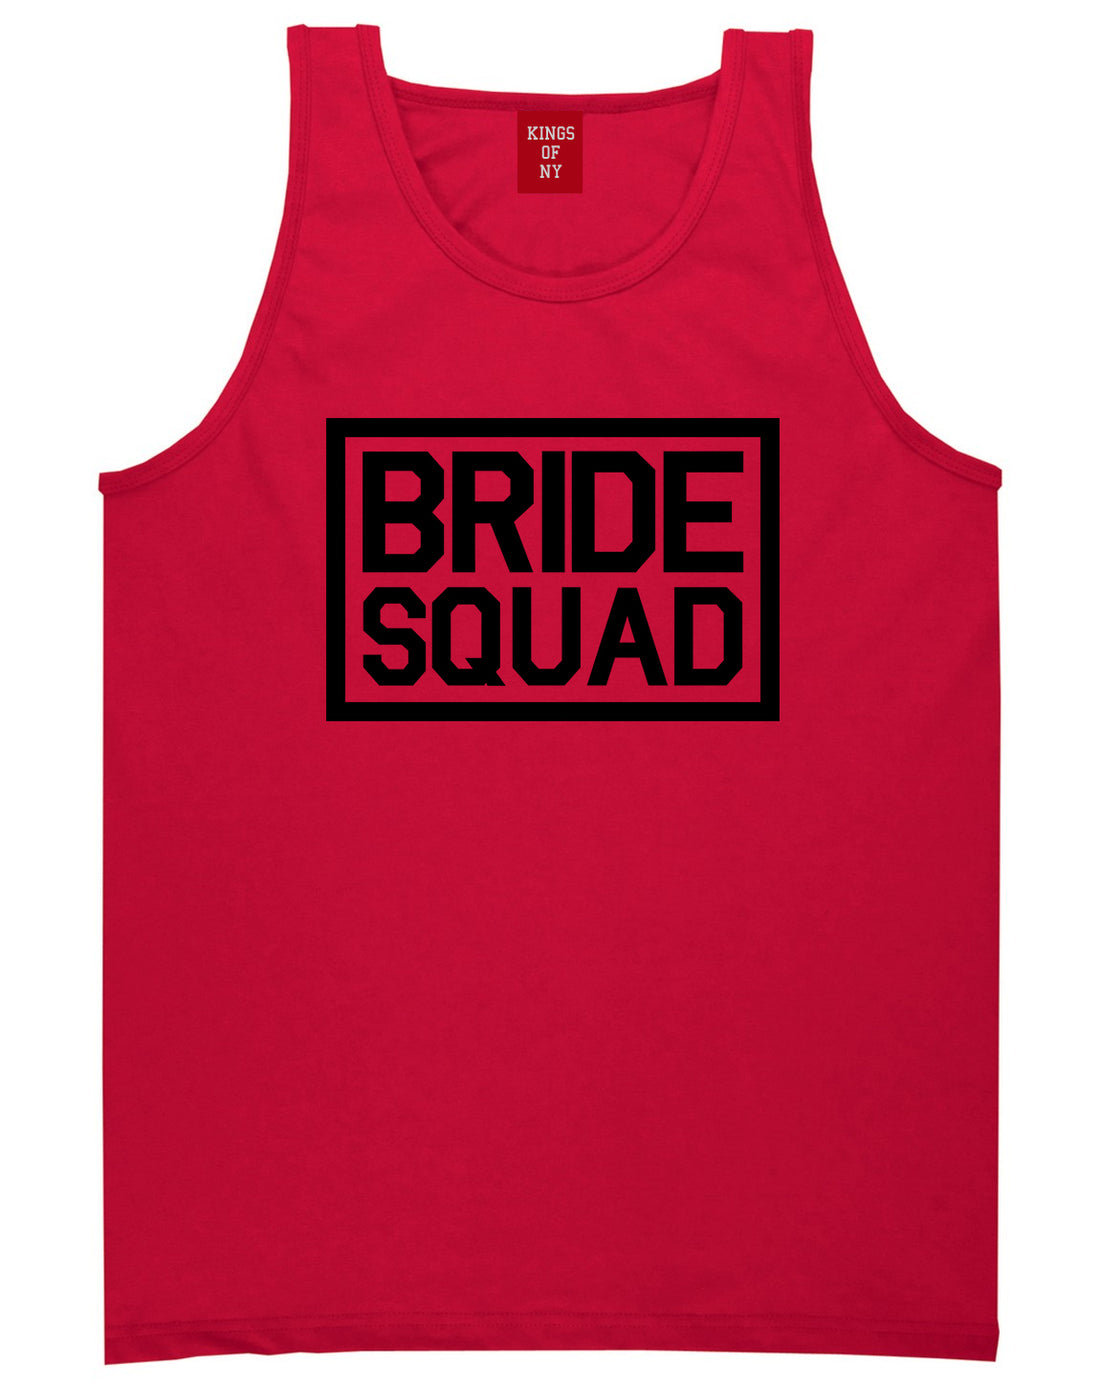 Bride Squad Bachlorette Party Red Tank Top Shirt by Kings Of NY